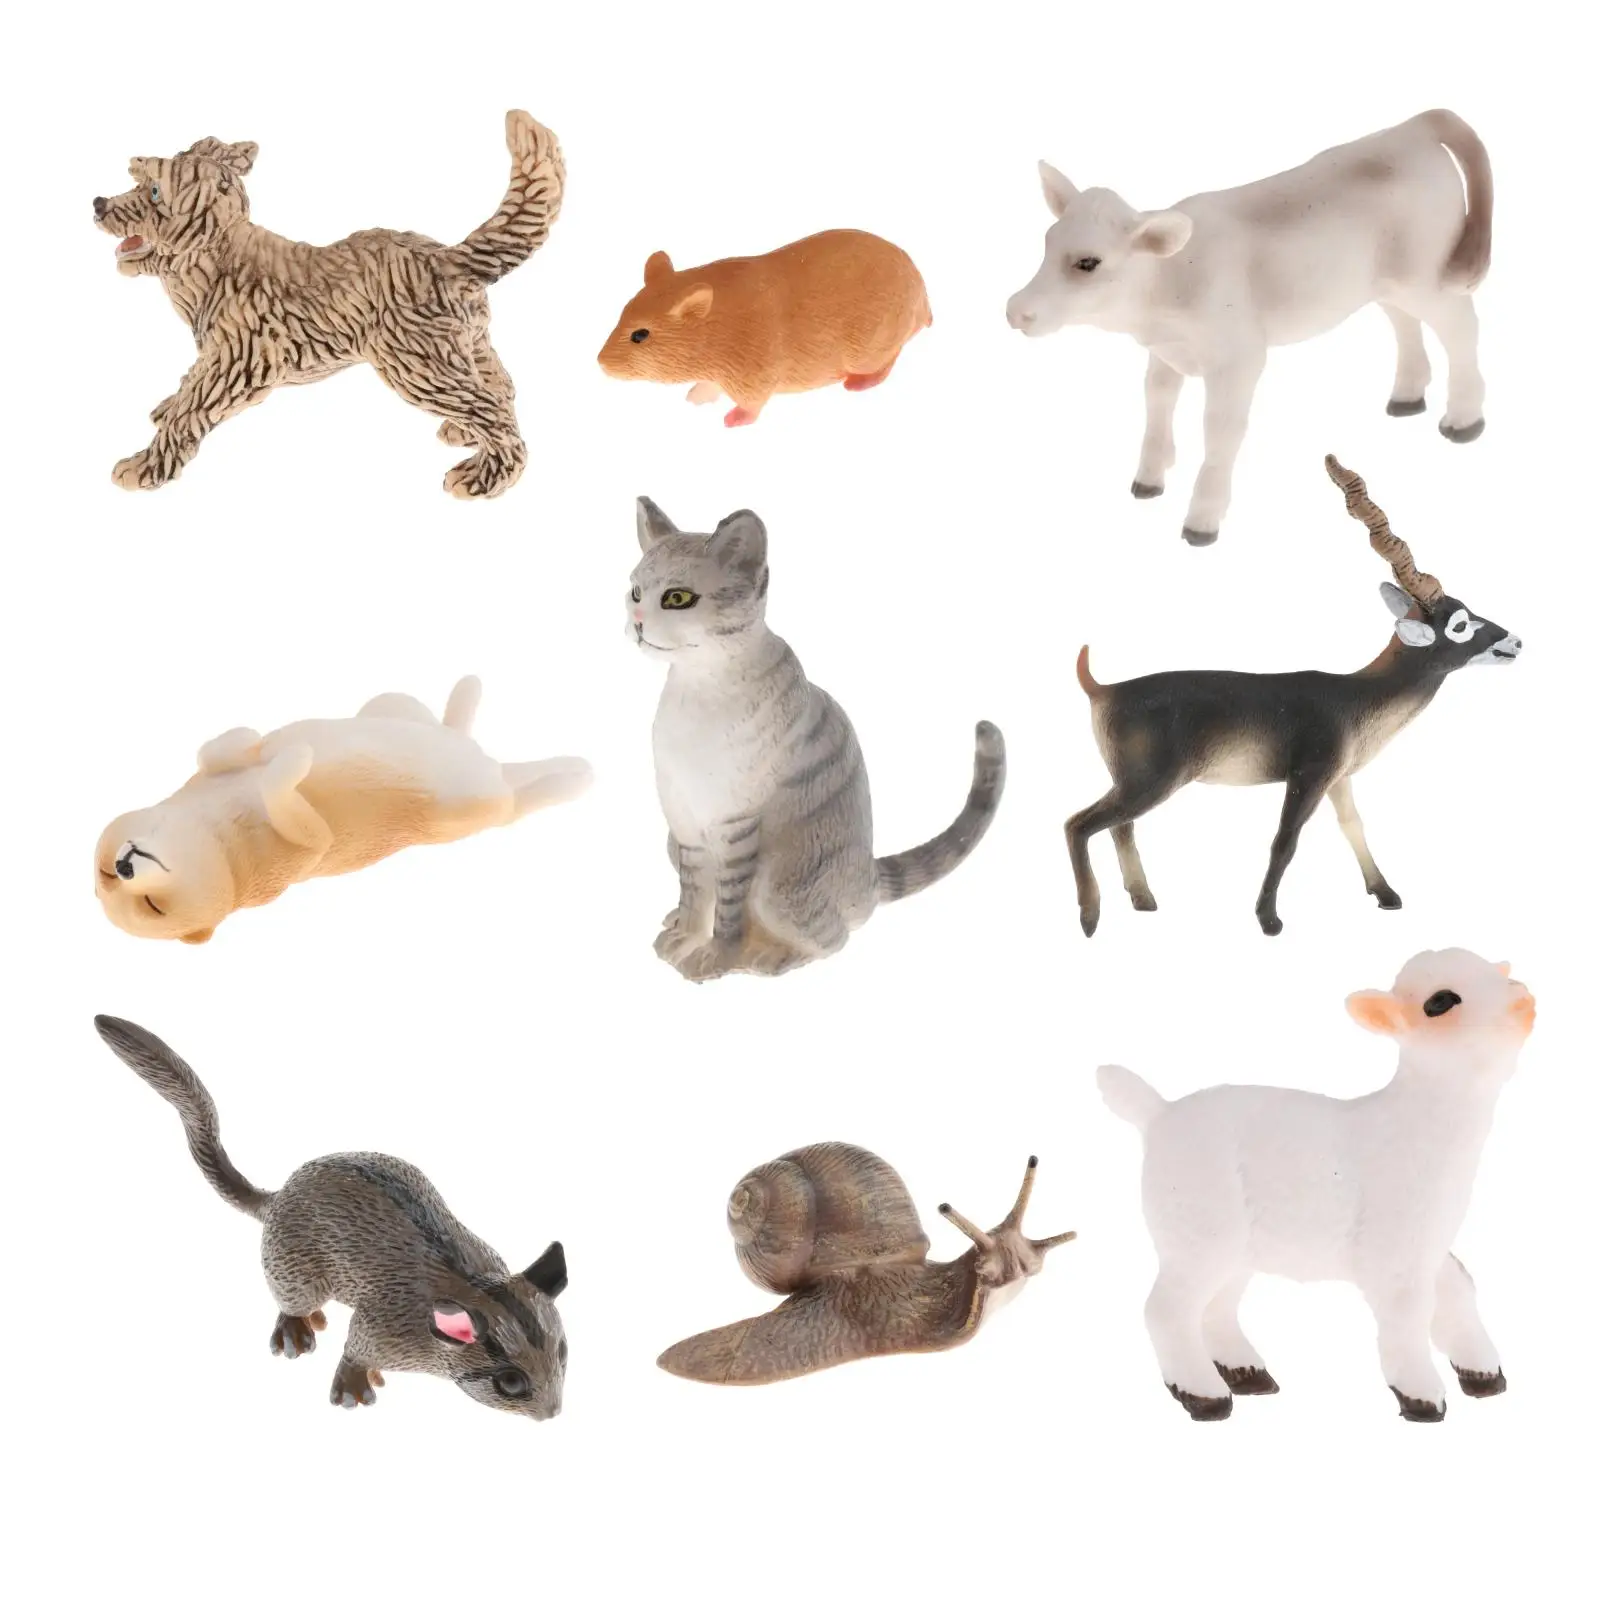 Simulated Action Figures Mini Animals Figurine Simulated Realistic Animals Home Decoration Gift